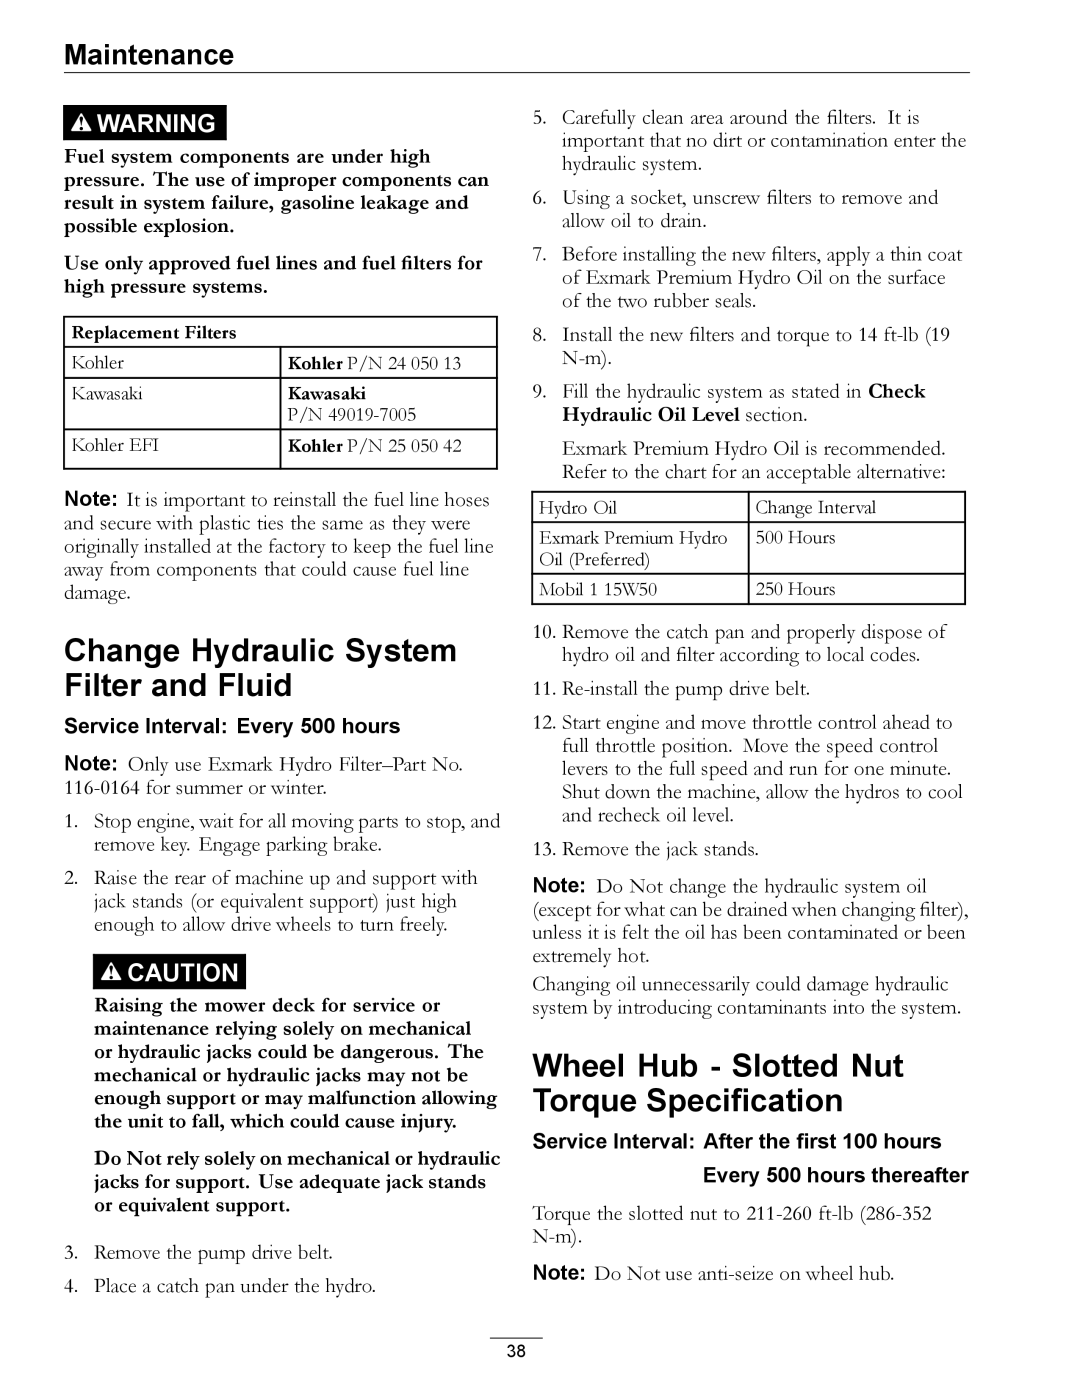 Exmark 920 manual Change Hydraulic System Filter and Fluid, Wheel Hub Slotted Nut Torque Specification 